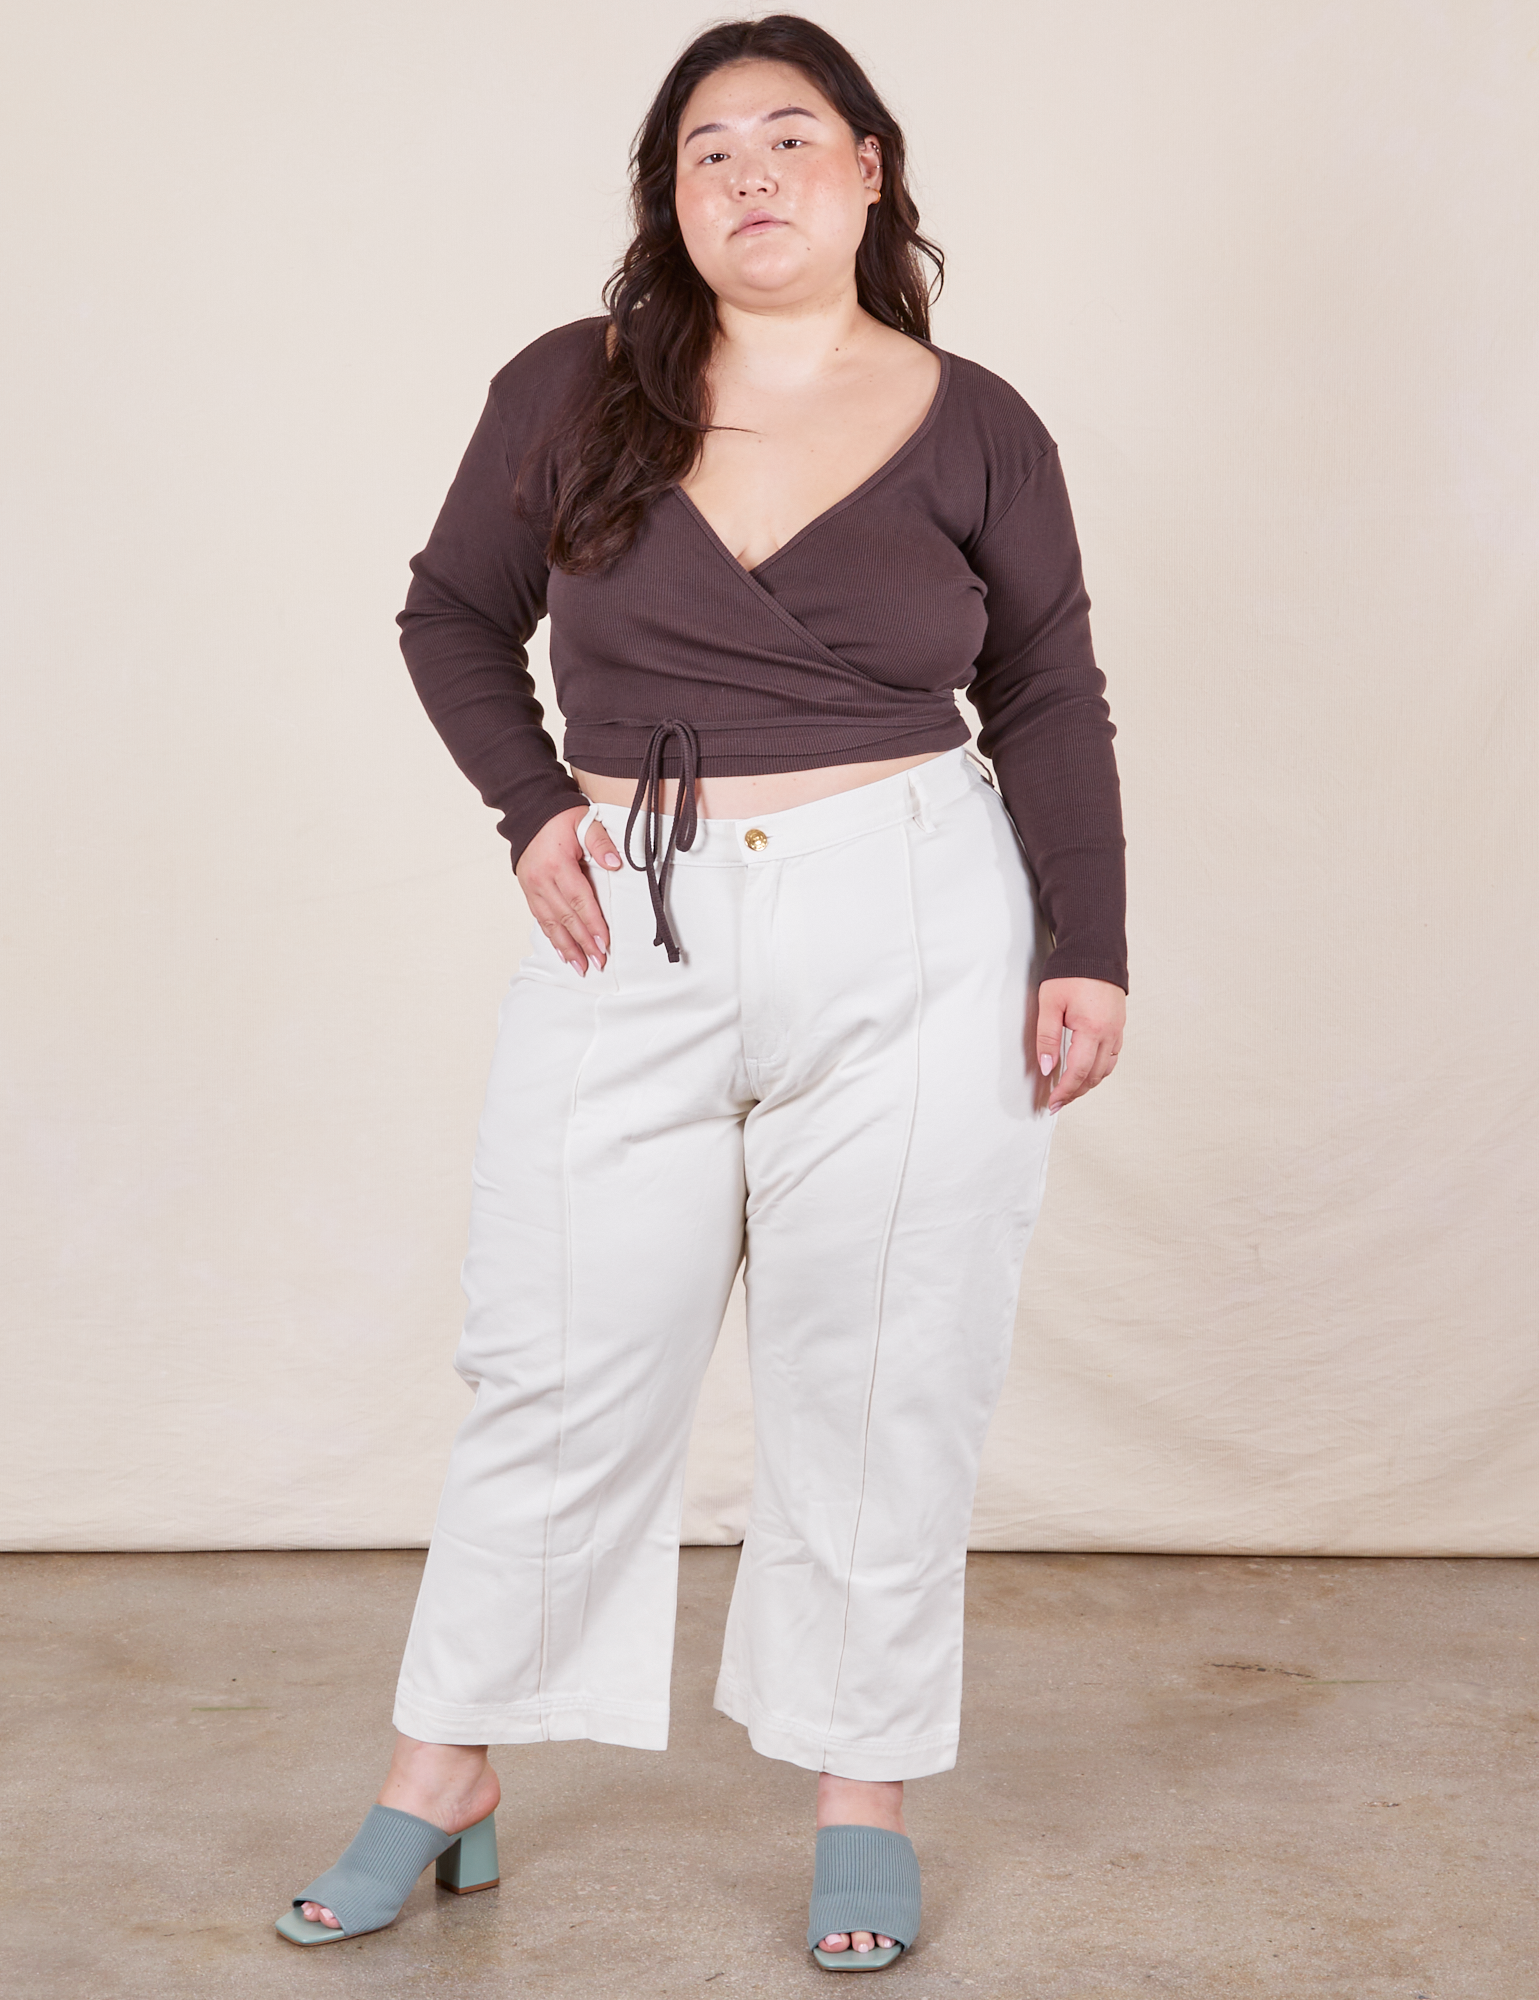 Ashley is 5&#39;7 and wearing 1XL Petite Western Pants in Vintage Off-White paired with espresso brown Wrap Top